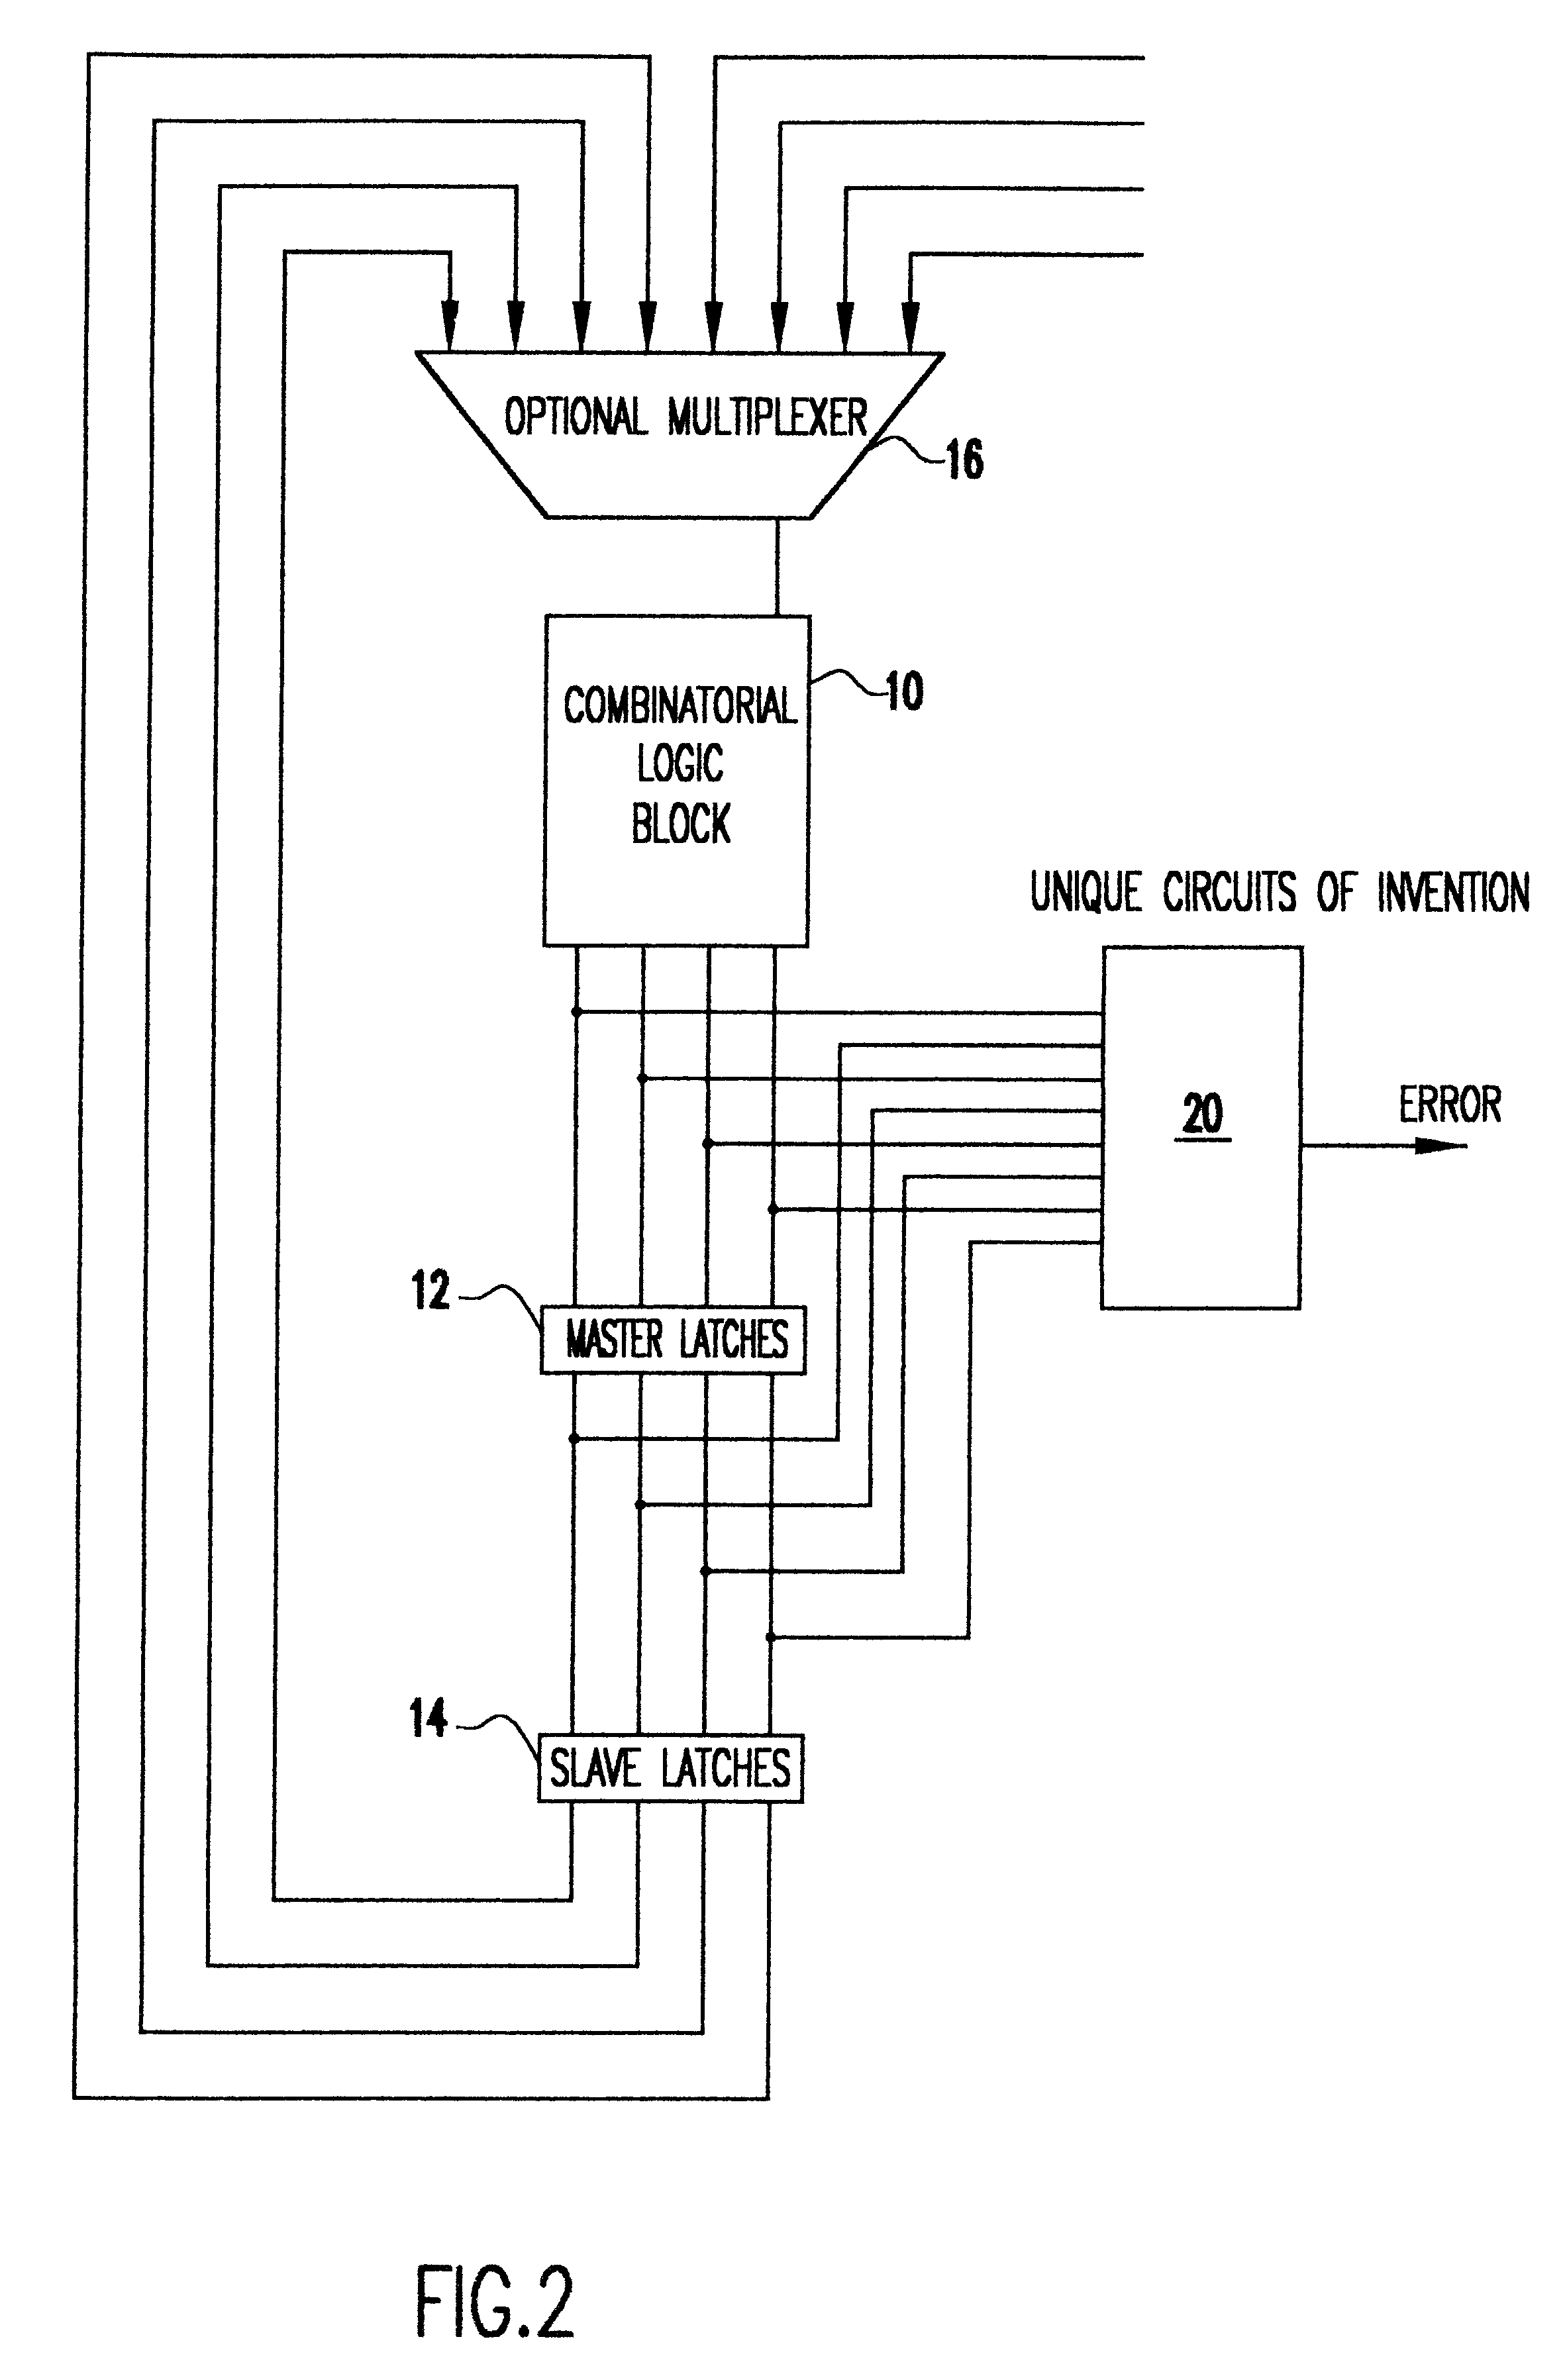 System technique for detecting soft errors in statically coupled CMOS logic